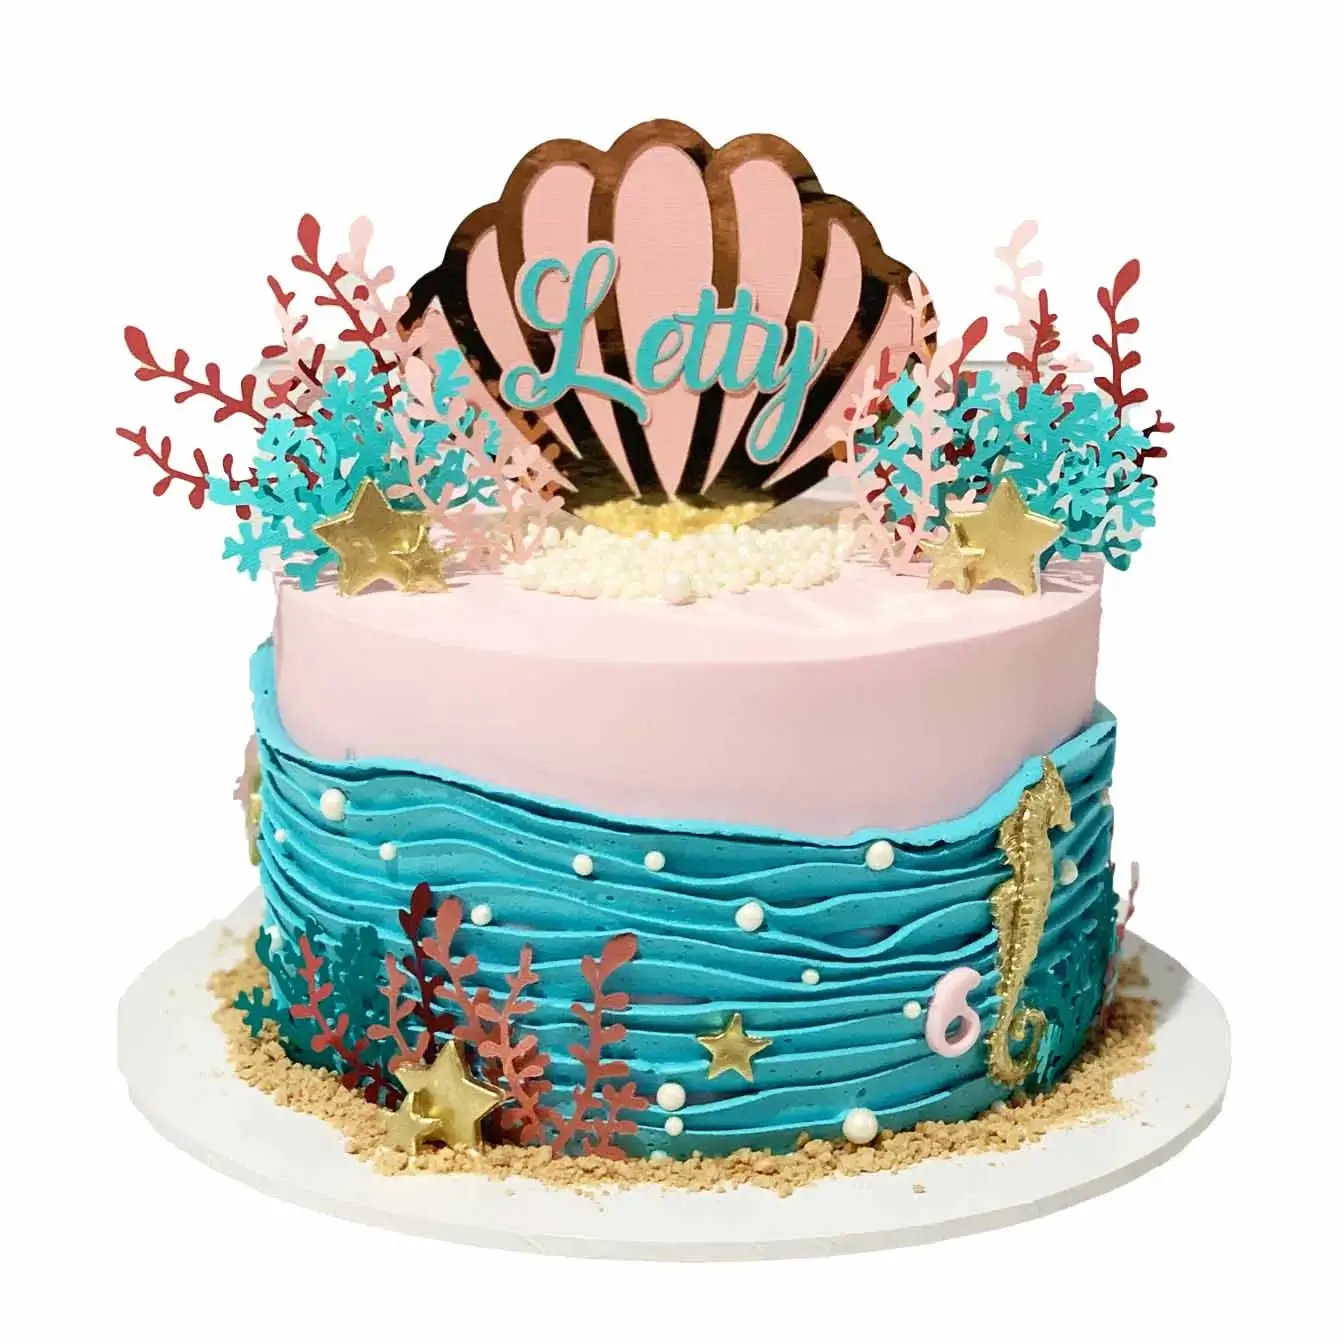 Pink Under the Sea Paradise Cake - Pink iced cake with blue piped waves, adorned with a custom shell cake topper, coral, seaweed, and pearls, a captivating choice for an undersea-themed celebration.